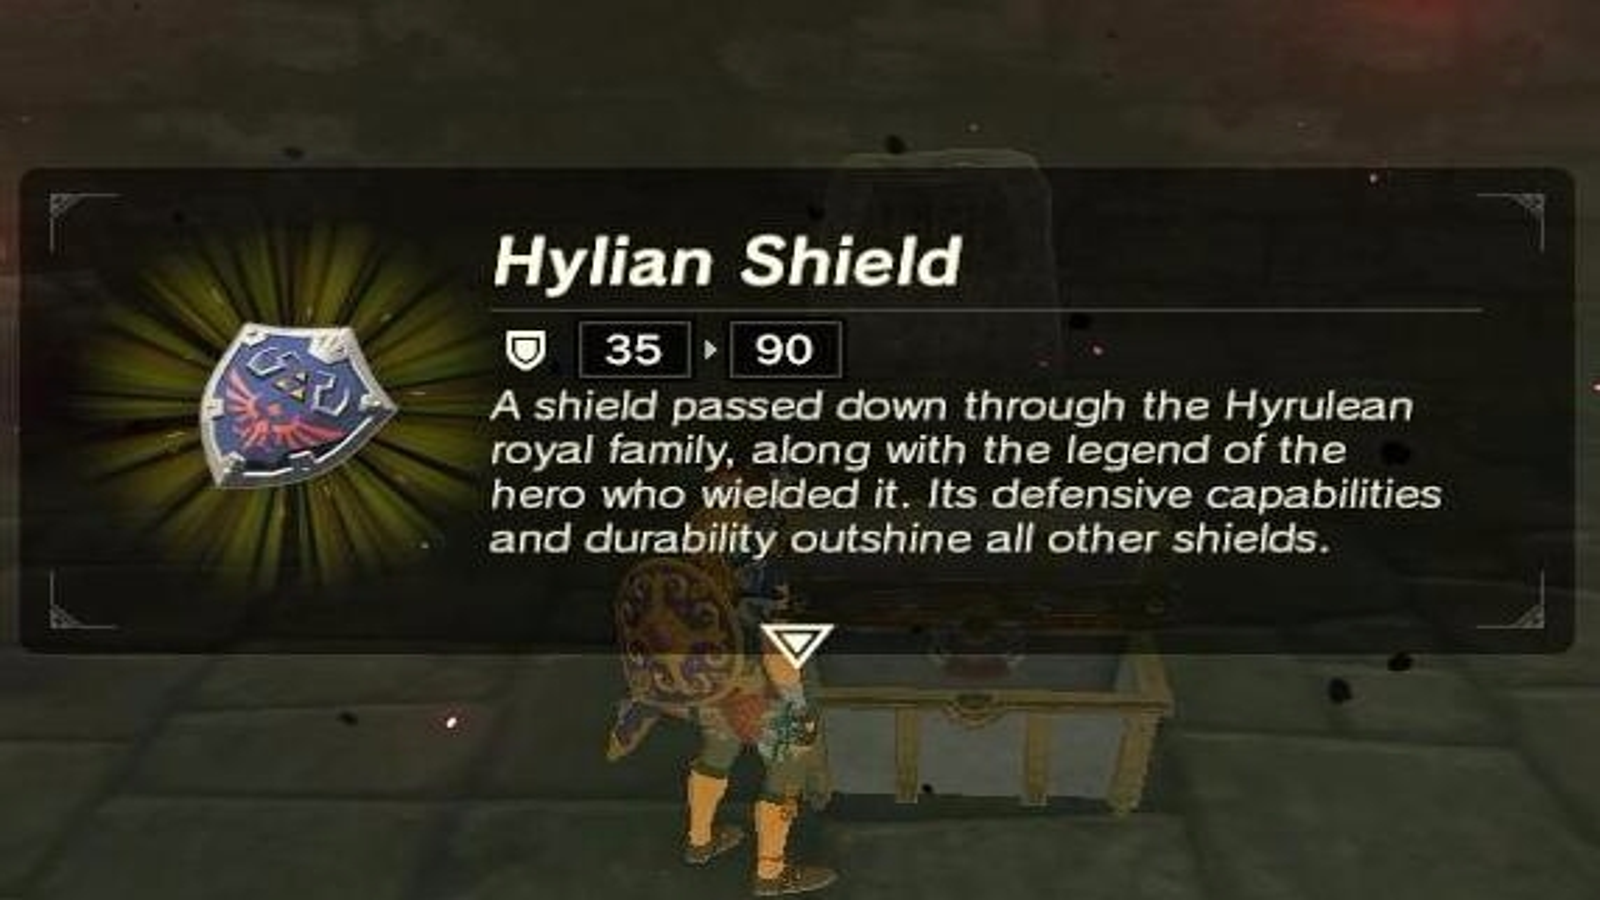 How many laser hits can the Hylian Shield take?